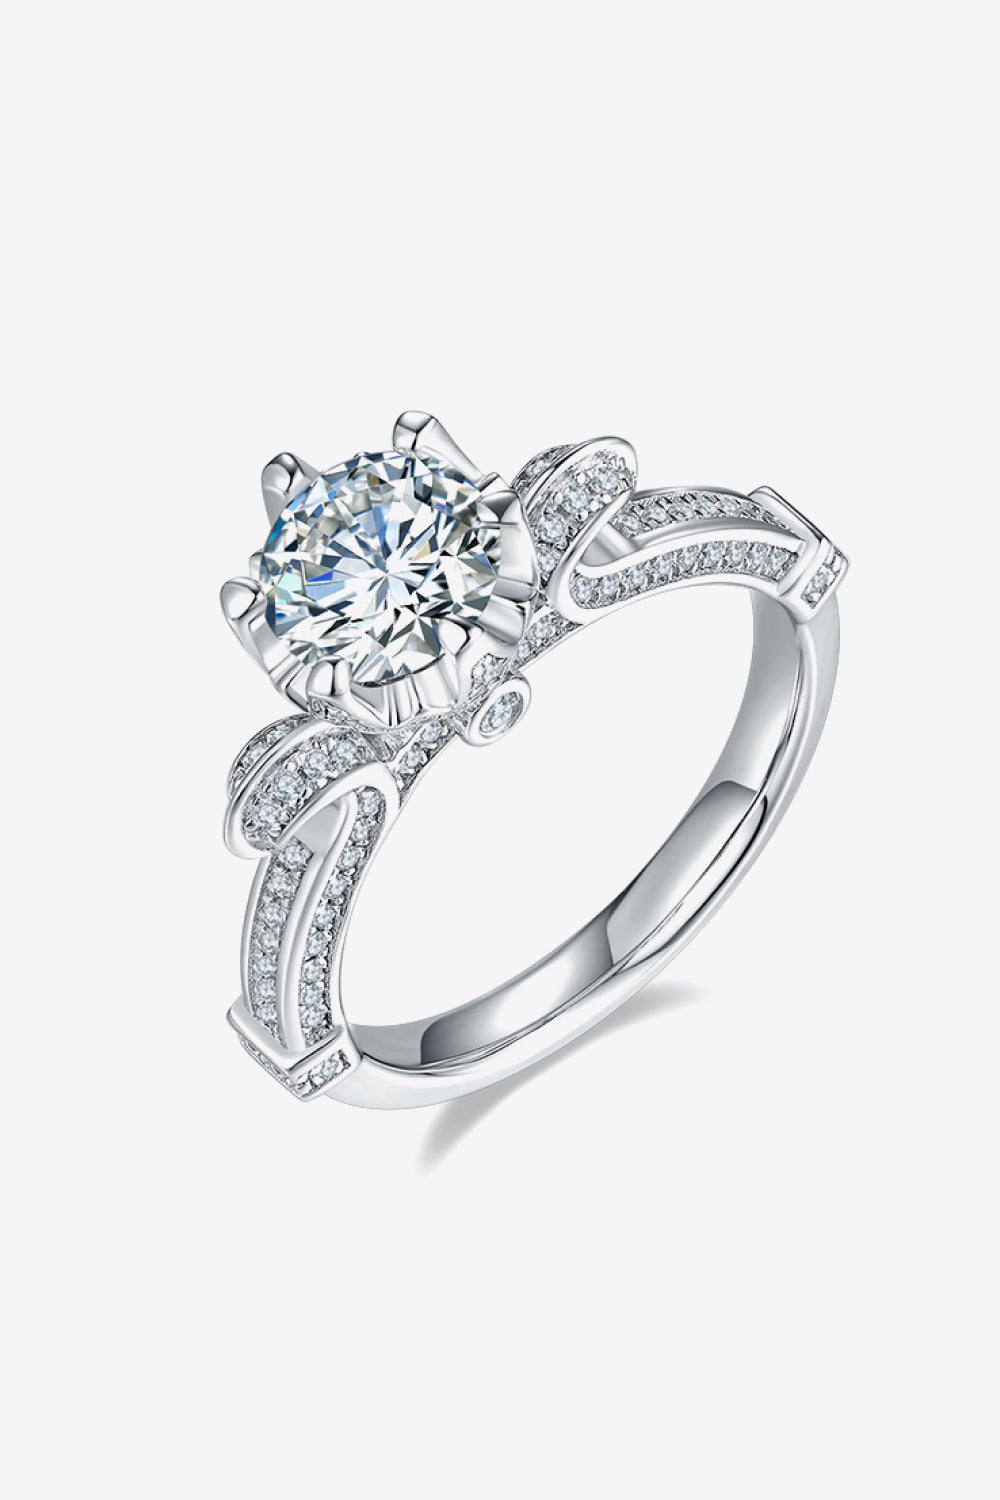 Adored 1 Carat Brilliant Round Cut Moissanite Platinum Over Pure Sterling Silver Ring